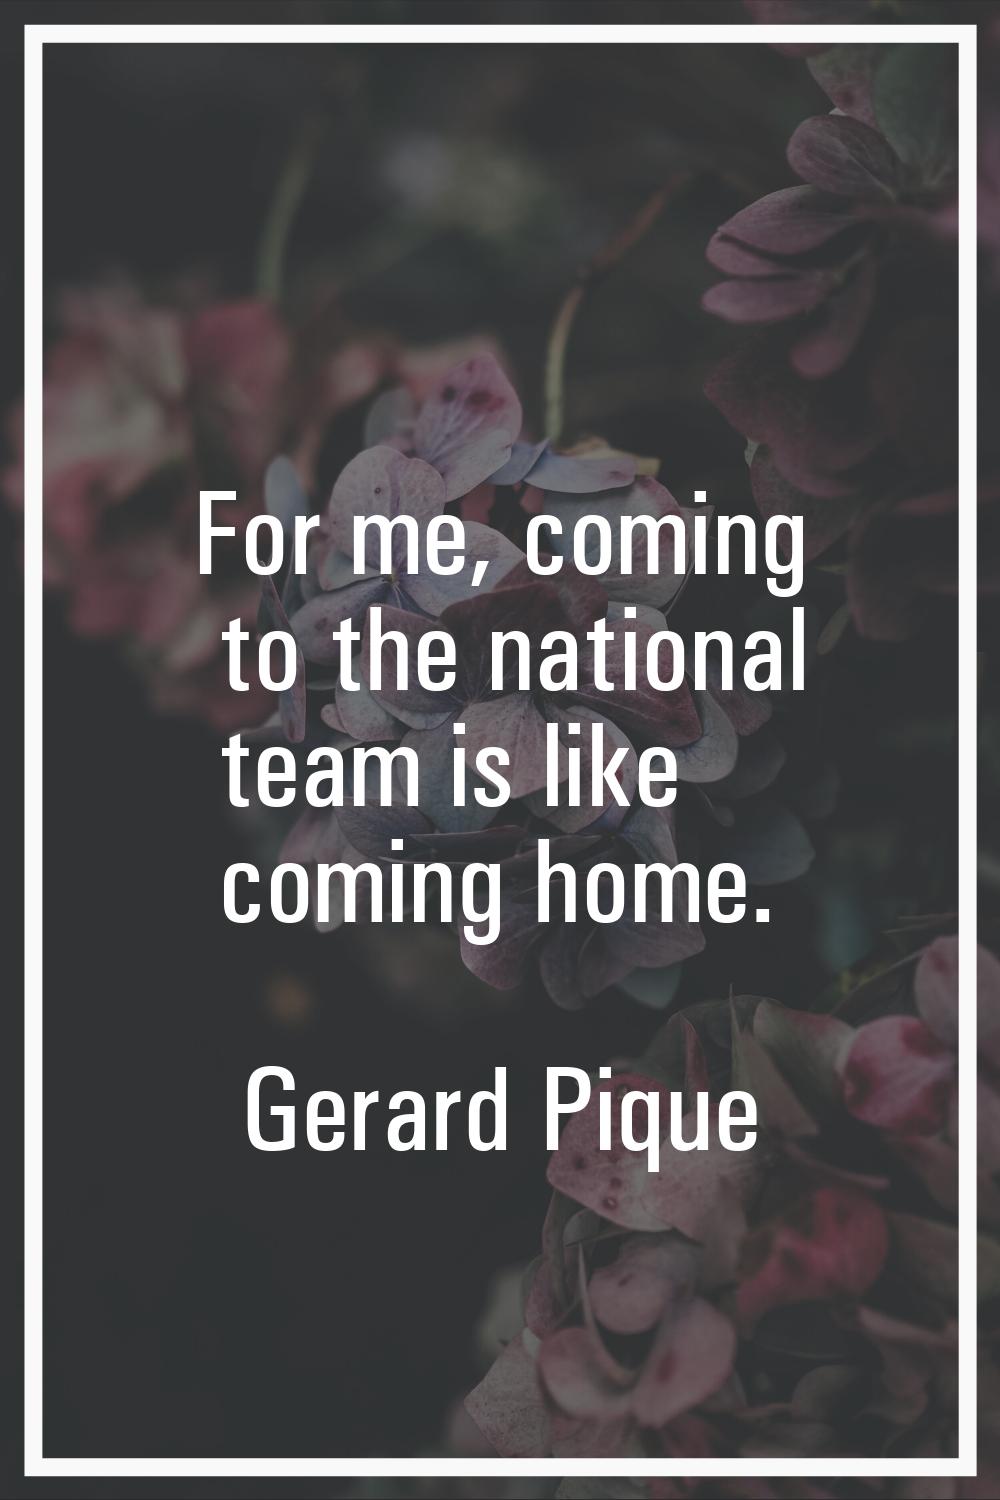 For me, coming to the national team is like coming home.